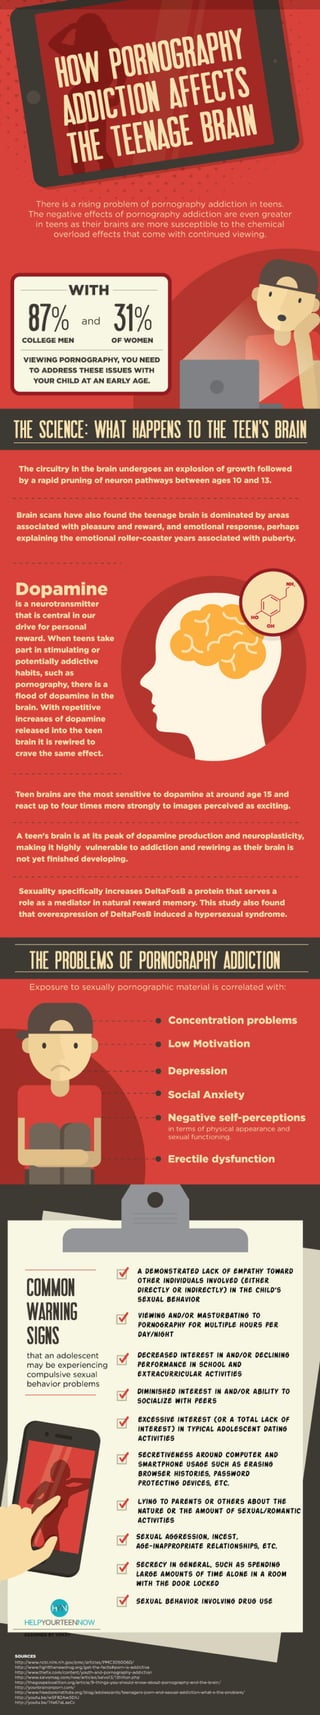 How Pornography Affects The Teenage Brain - Infographic